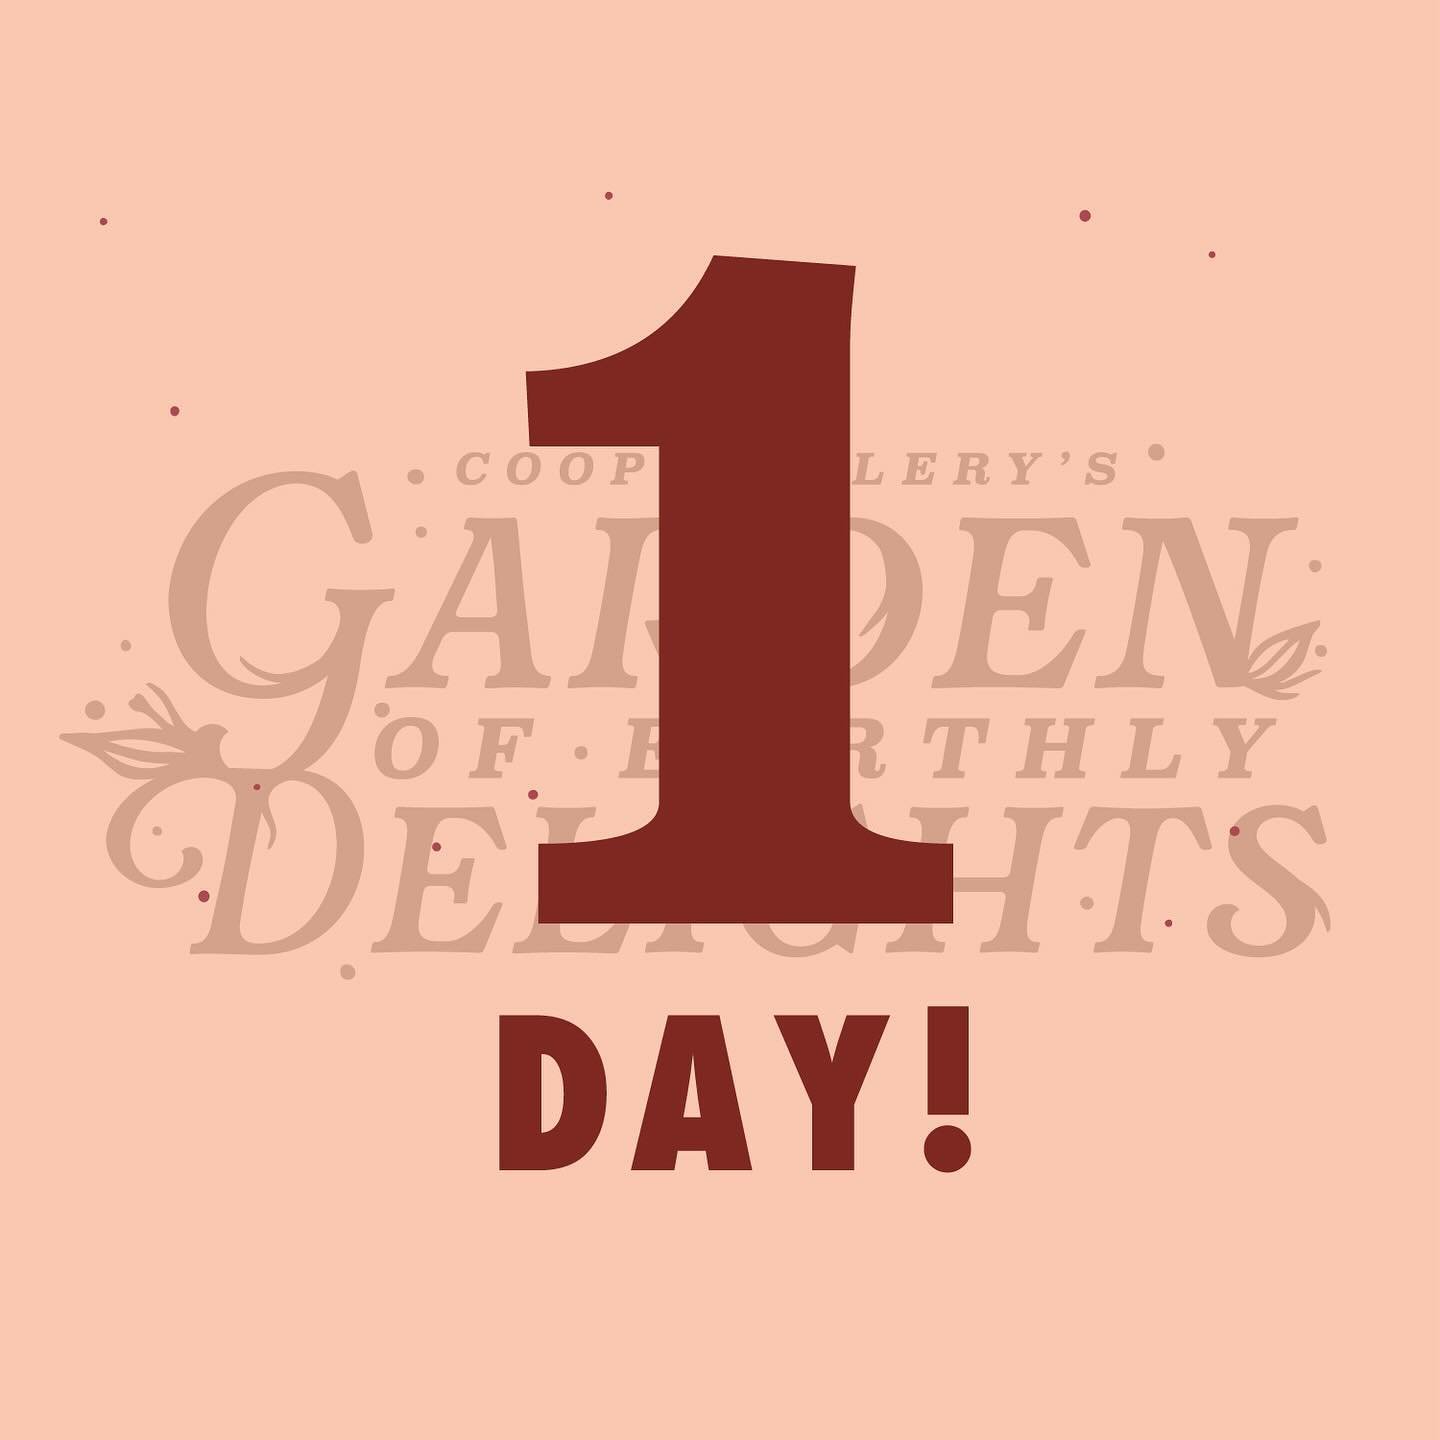 COOP Gallery invites you TOMORROW to our Garden of Earthly Delights. Come for the art, live performances, libations and all around fun. The best part? You&rsquo;ll be supporting Tennessee Artists!! Tickets in link in bio!